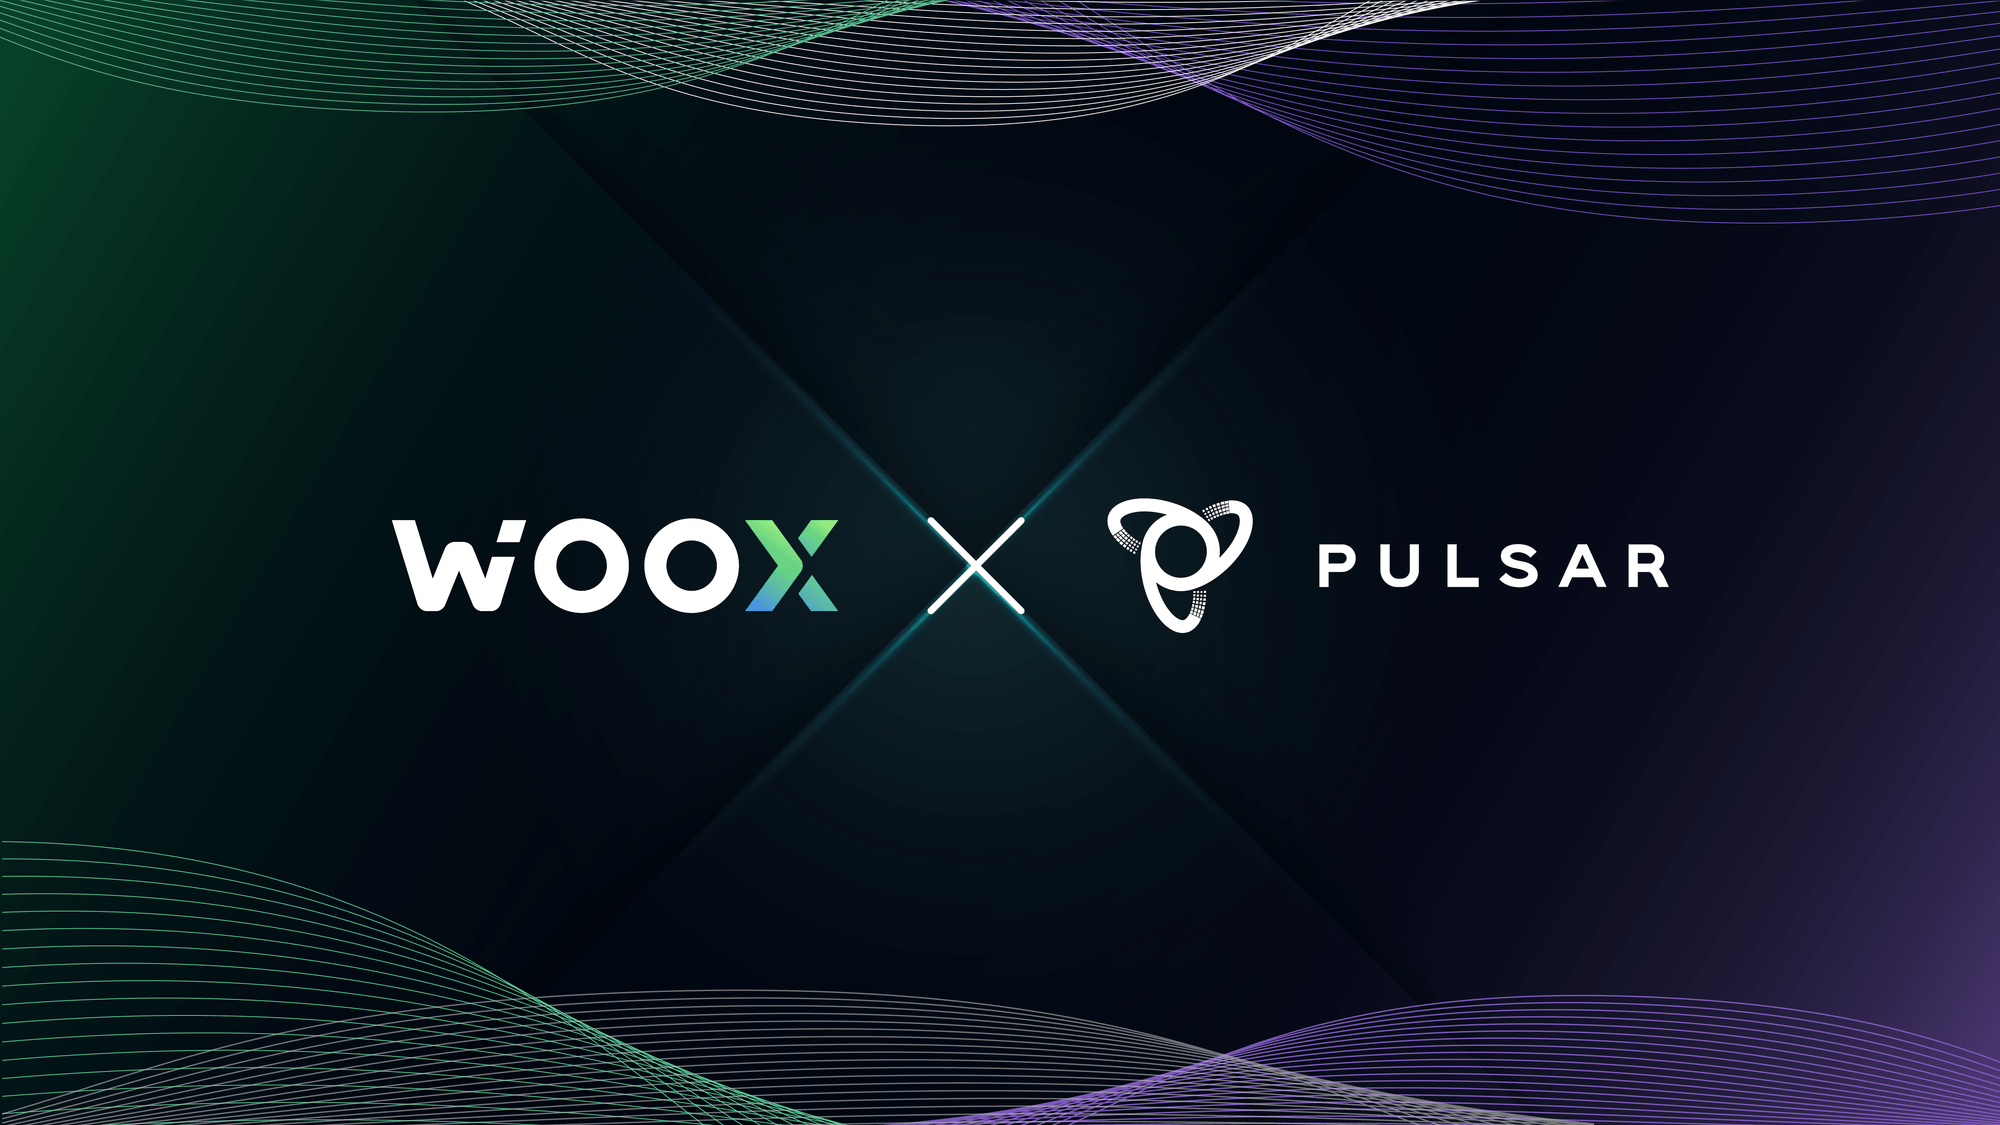 WOO X partners with global top trader Pulsar to boost liquidity